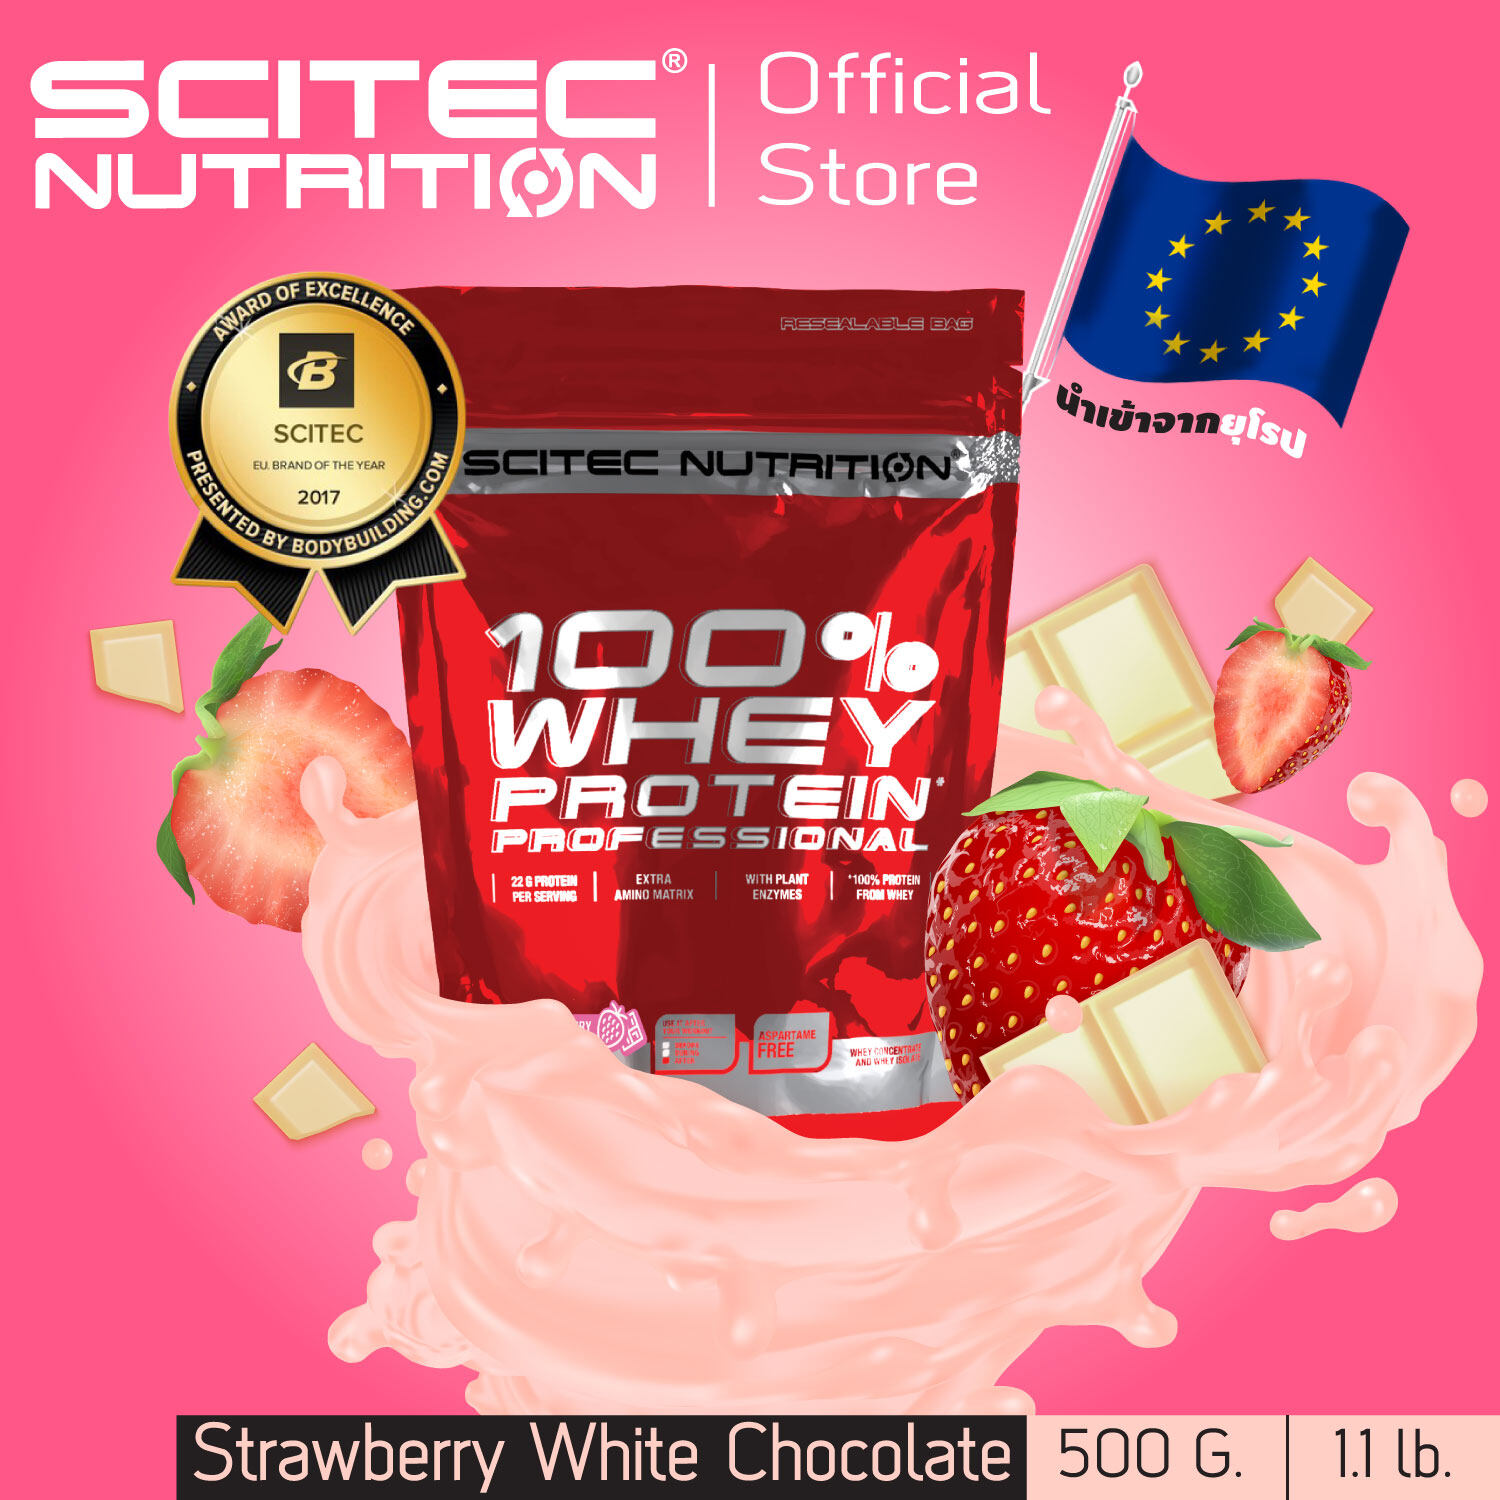 SCITEC NUTRITION Whey Protein , เวย์โปรตีน (100% Whey Protein Strawberry White Chocolate 500g) เวย์โปรตีนเพิ่มกล้ามเนื้อ